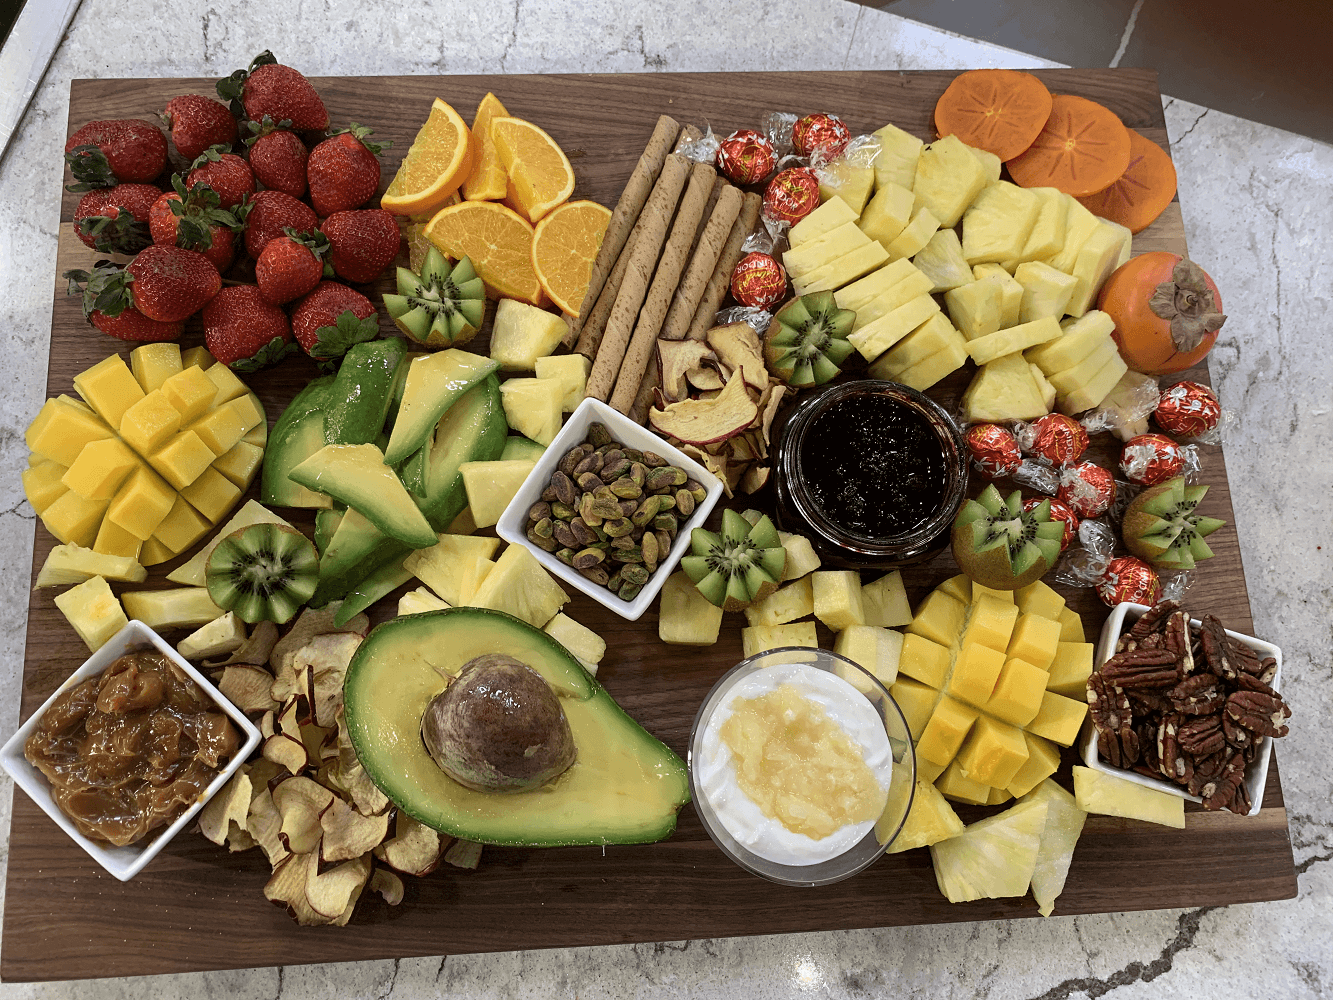 Get creative with your tropical fruit dessert board